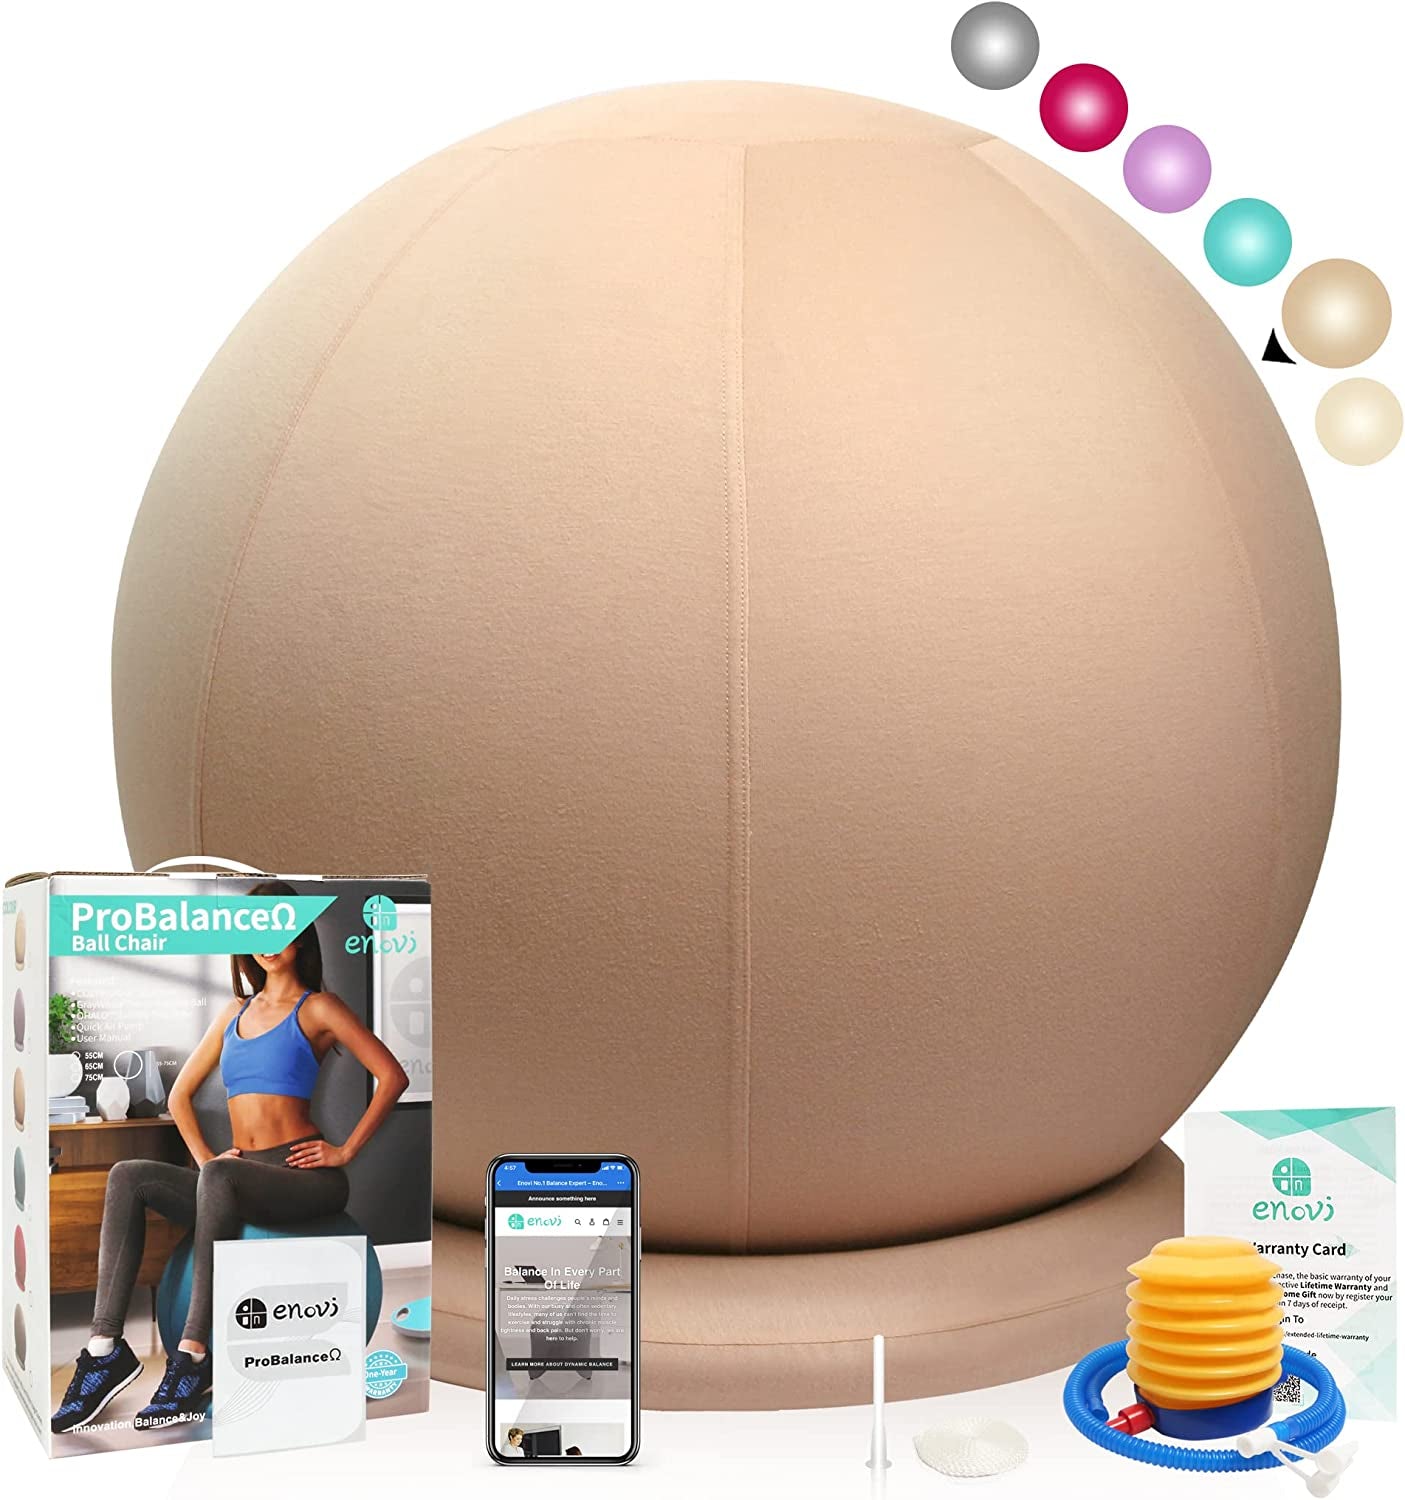 "Pro Balance Ball Chair: Optimize Comfort and Support for Work, Yoga, and Pregnancy. Stylish, Ergonomic Design with Slipcover and Stable Base. Relieve Back Pain and Embrace a Healthier, Active Lifestyle. Multiple Color and Size Options Available."